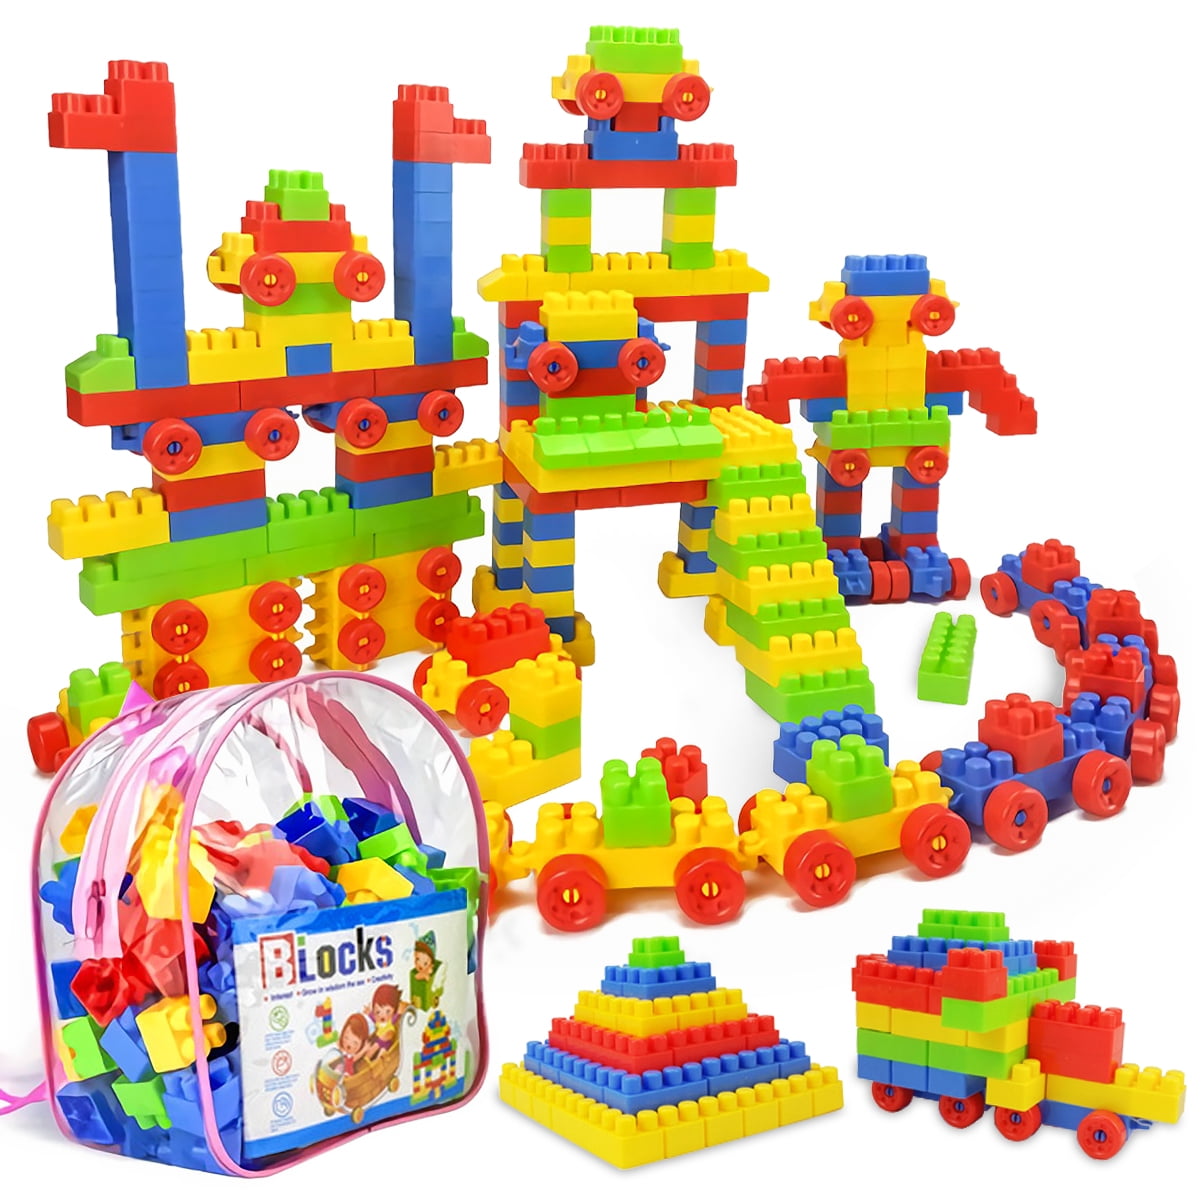 Baby Blocks Classic Building Blocks Wooden Educational Toy for Girls and Boys-80 Piece TOP BRIGHT Wooden Building Blocks Set for Toddlers 